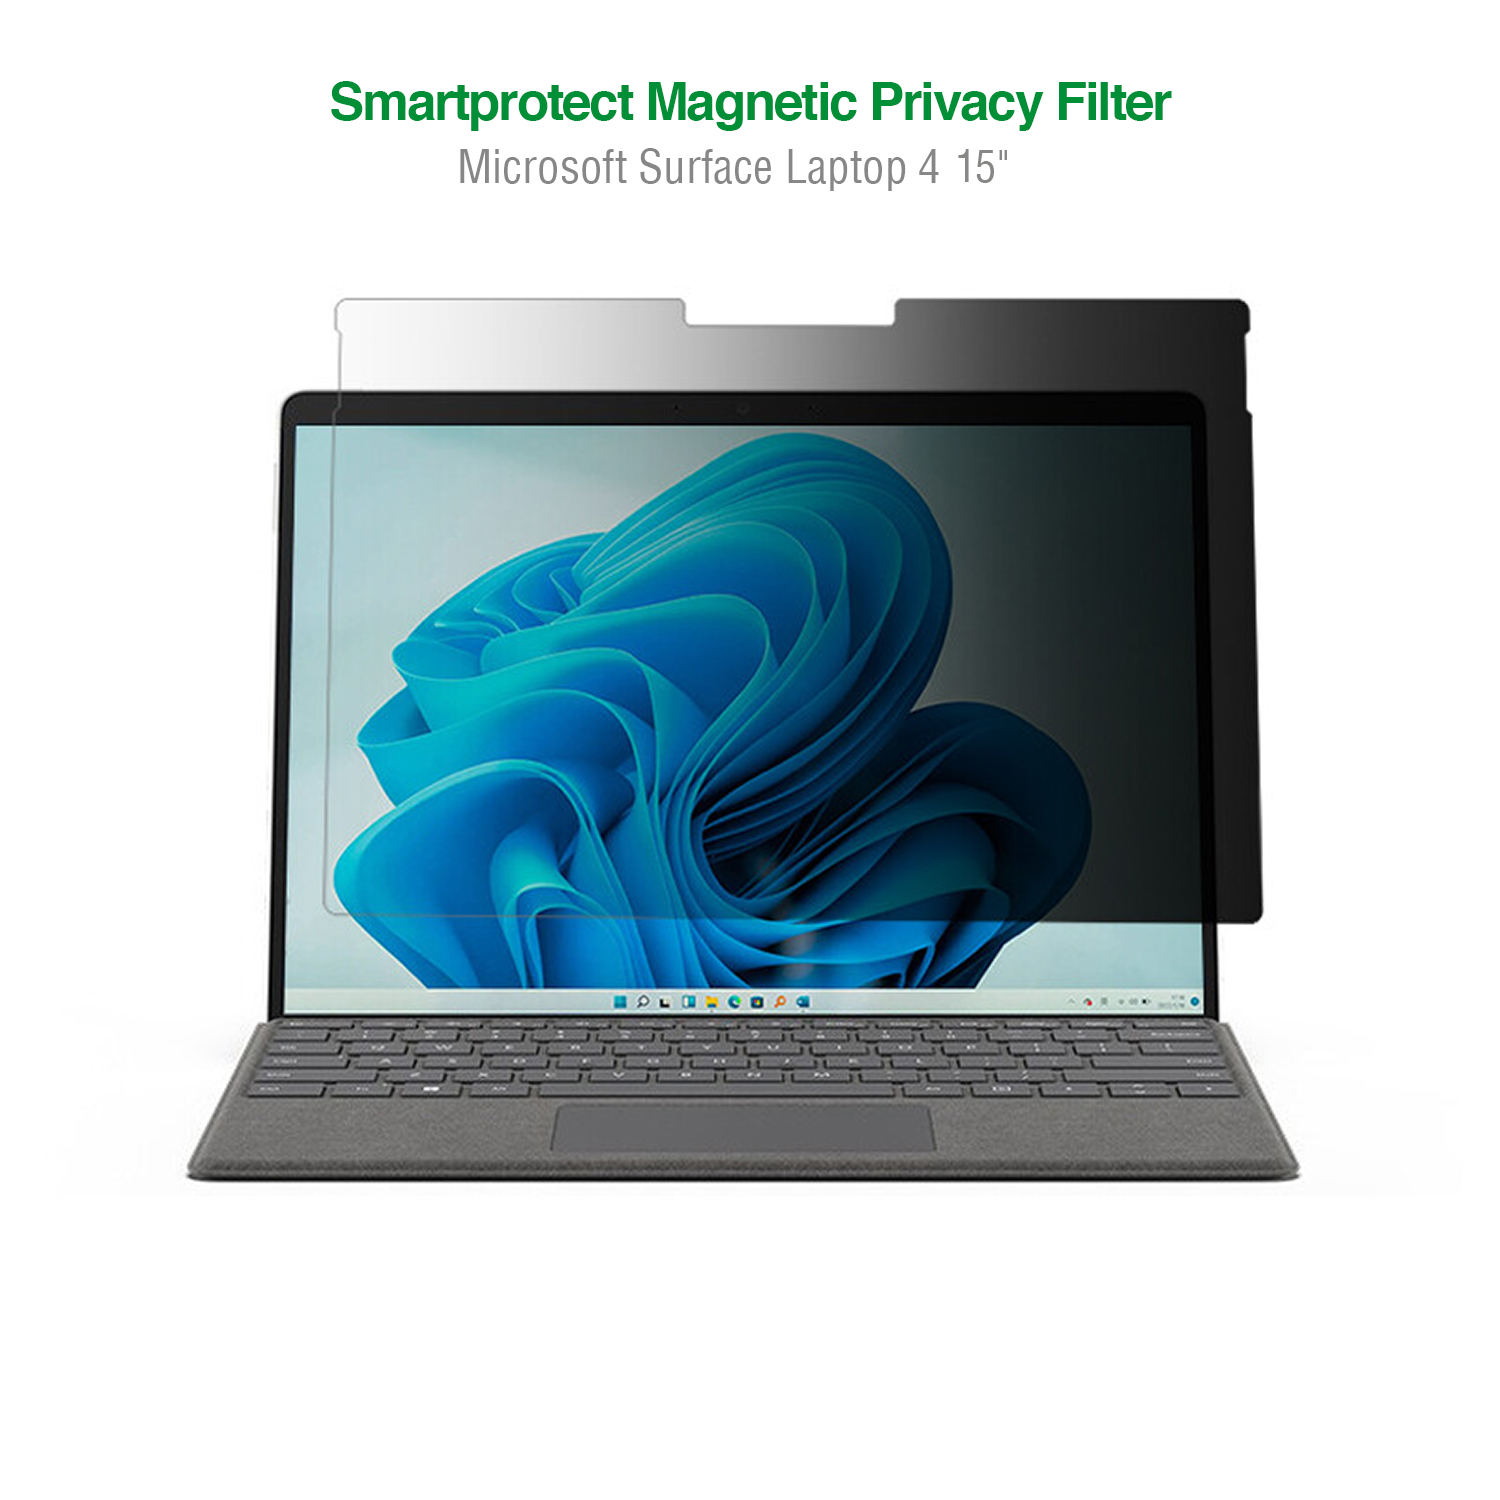 The mounting material and cleaning cloth are already included in the scope of delivery in addition to the privacy screen protector for your Microsoft Surface Laptop 4 15-inch.